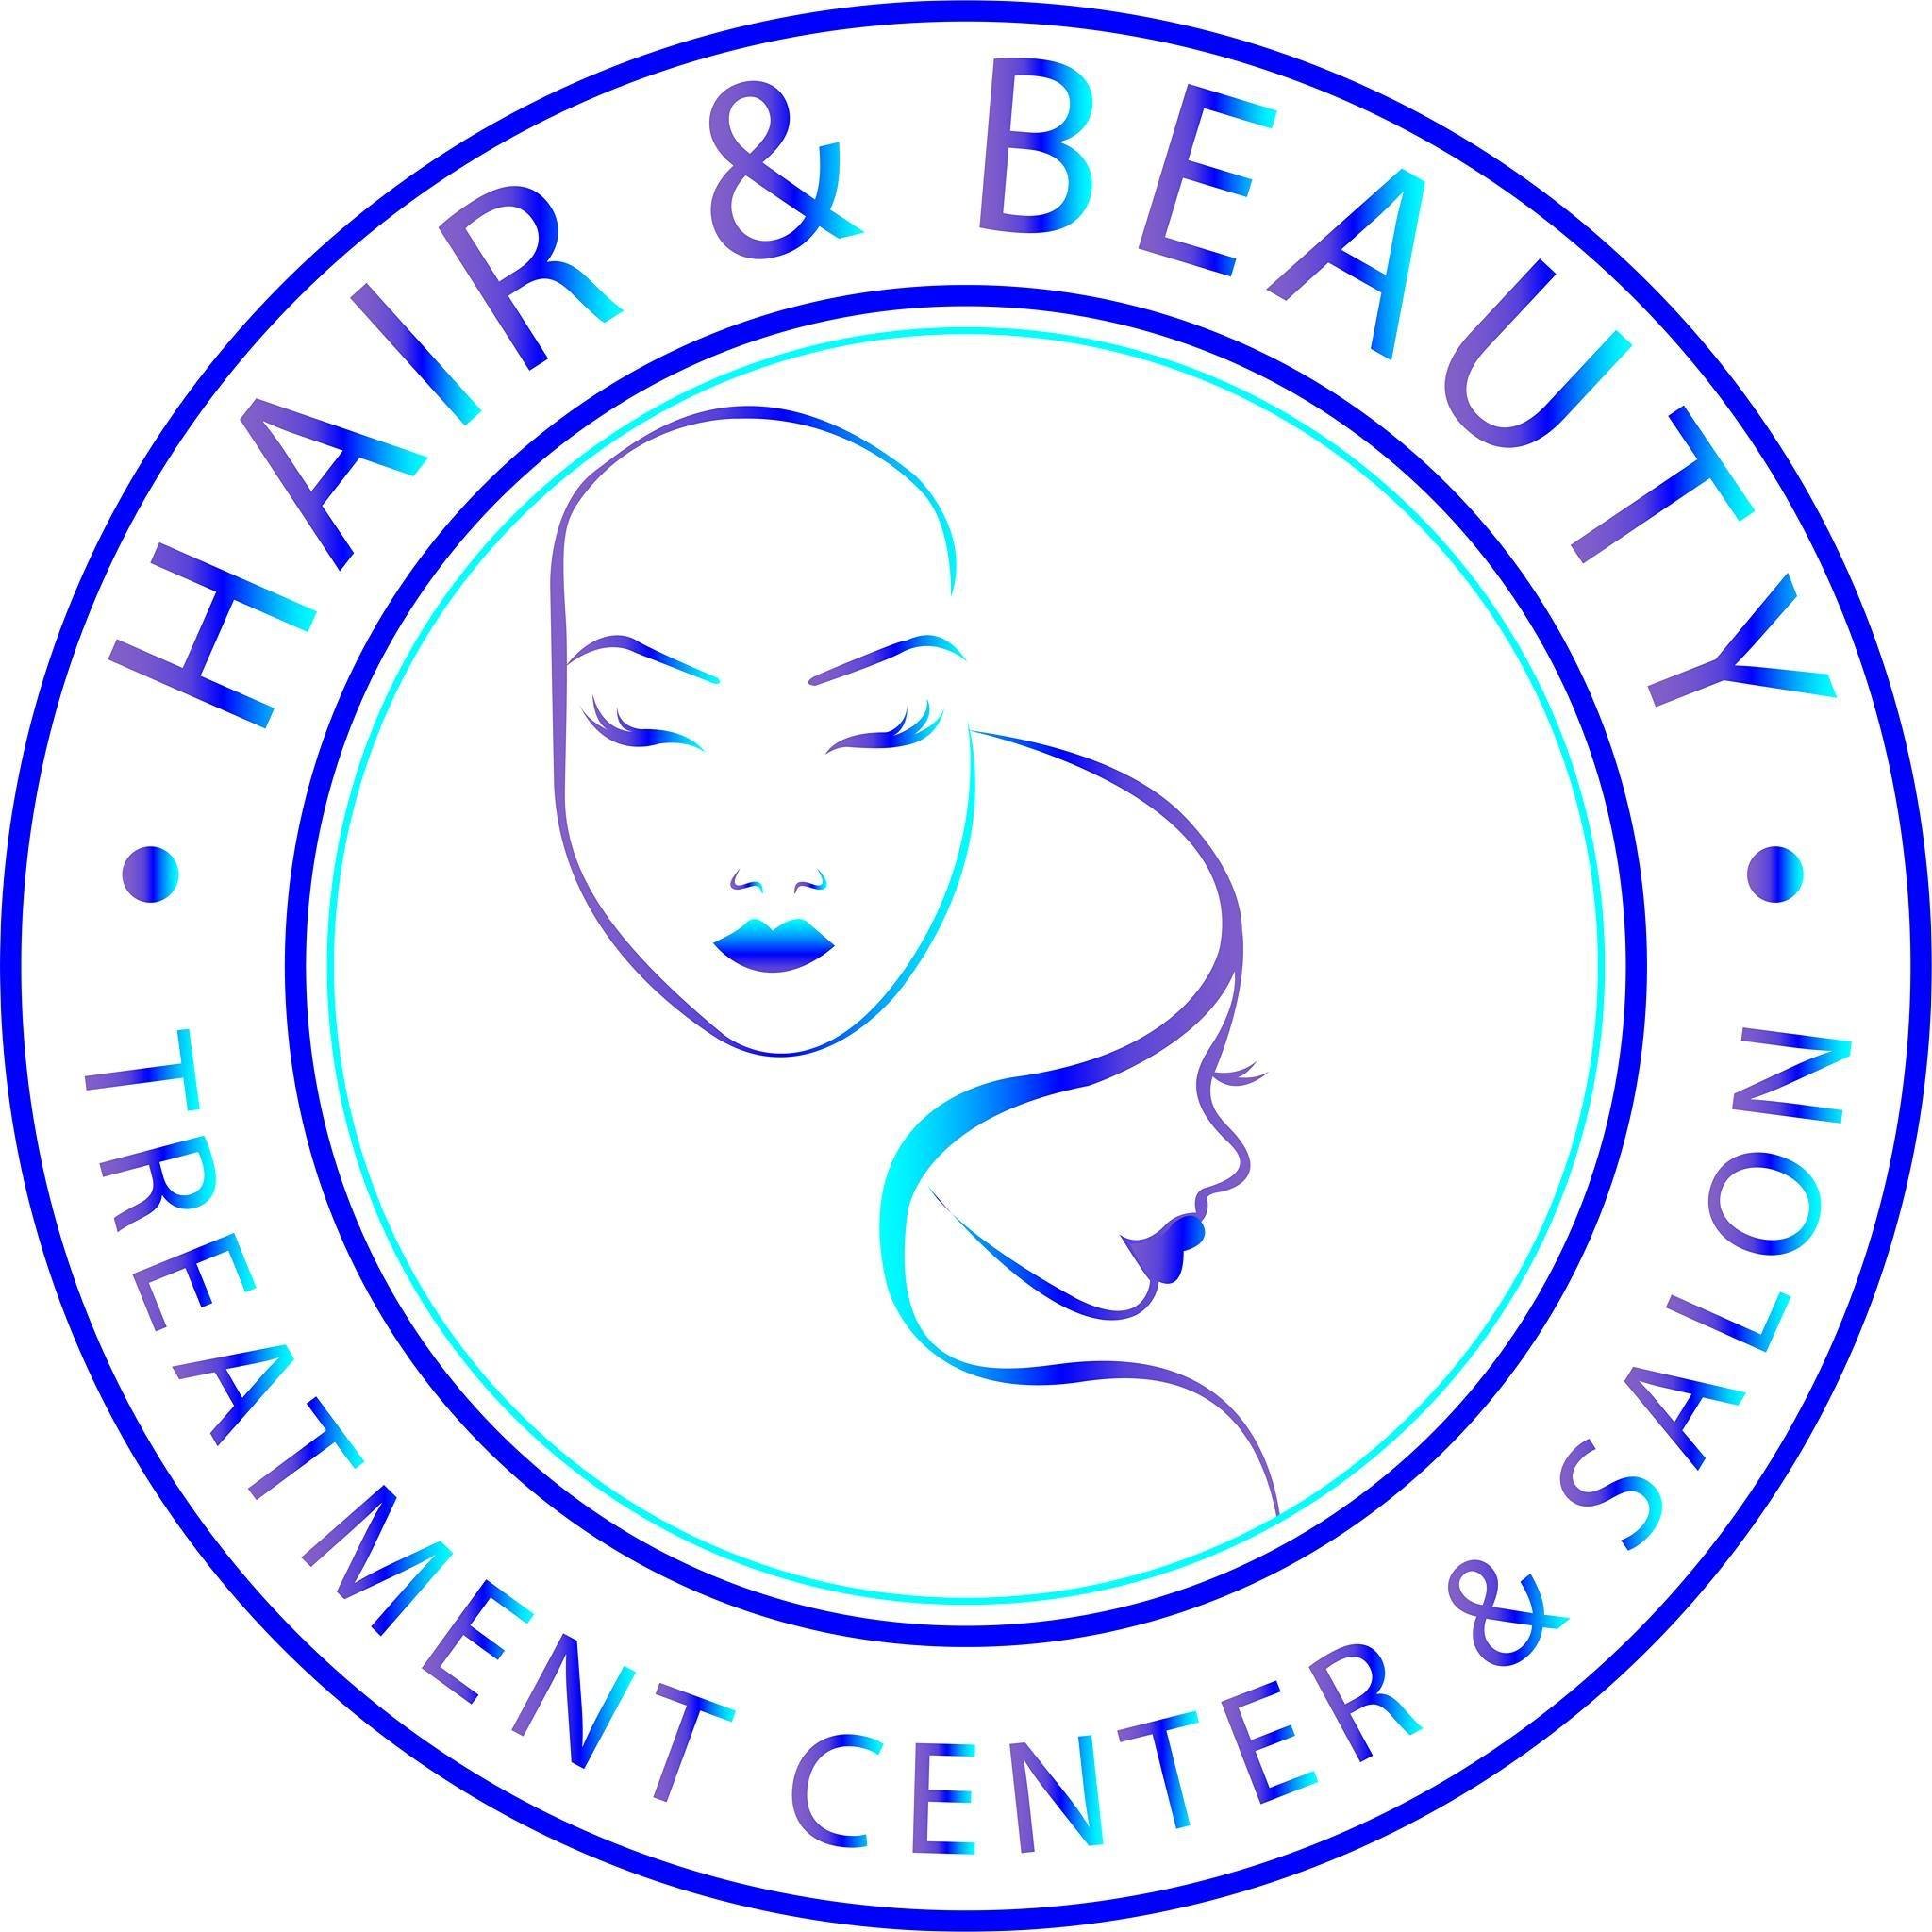 At our treatment center in Augusta, we provide clients in need of hair restoration with treatment-based services and solutions, custom wigs, and more.